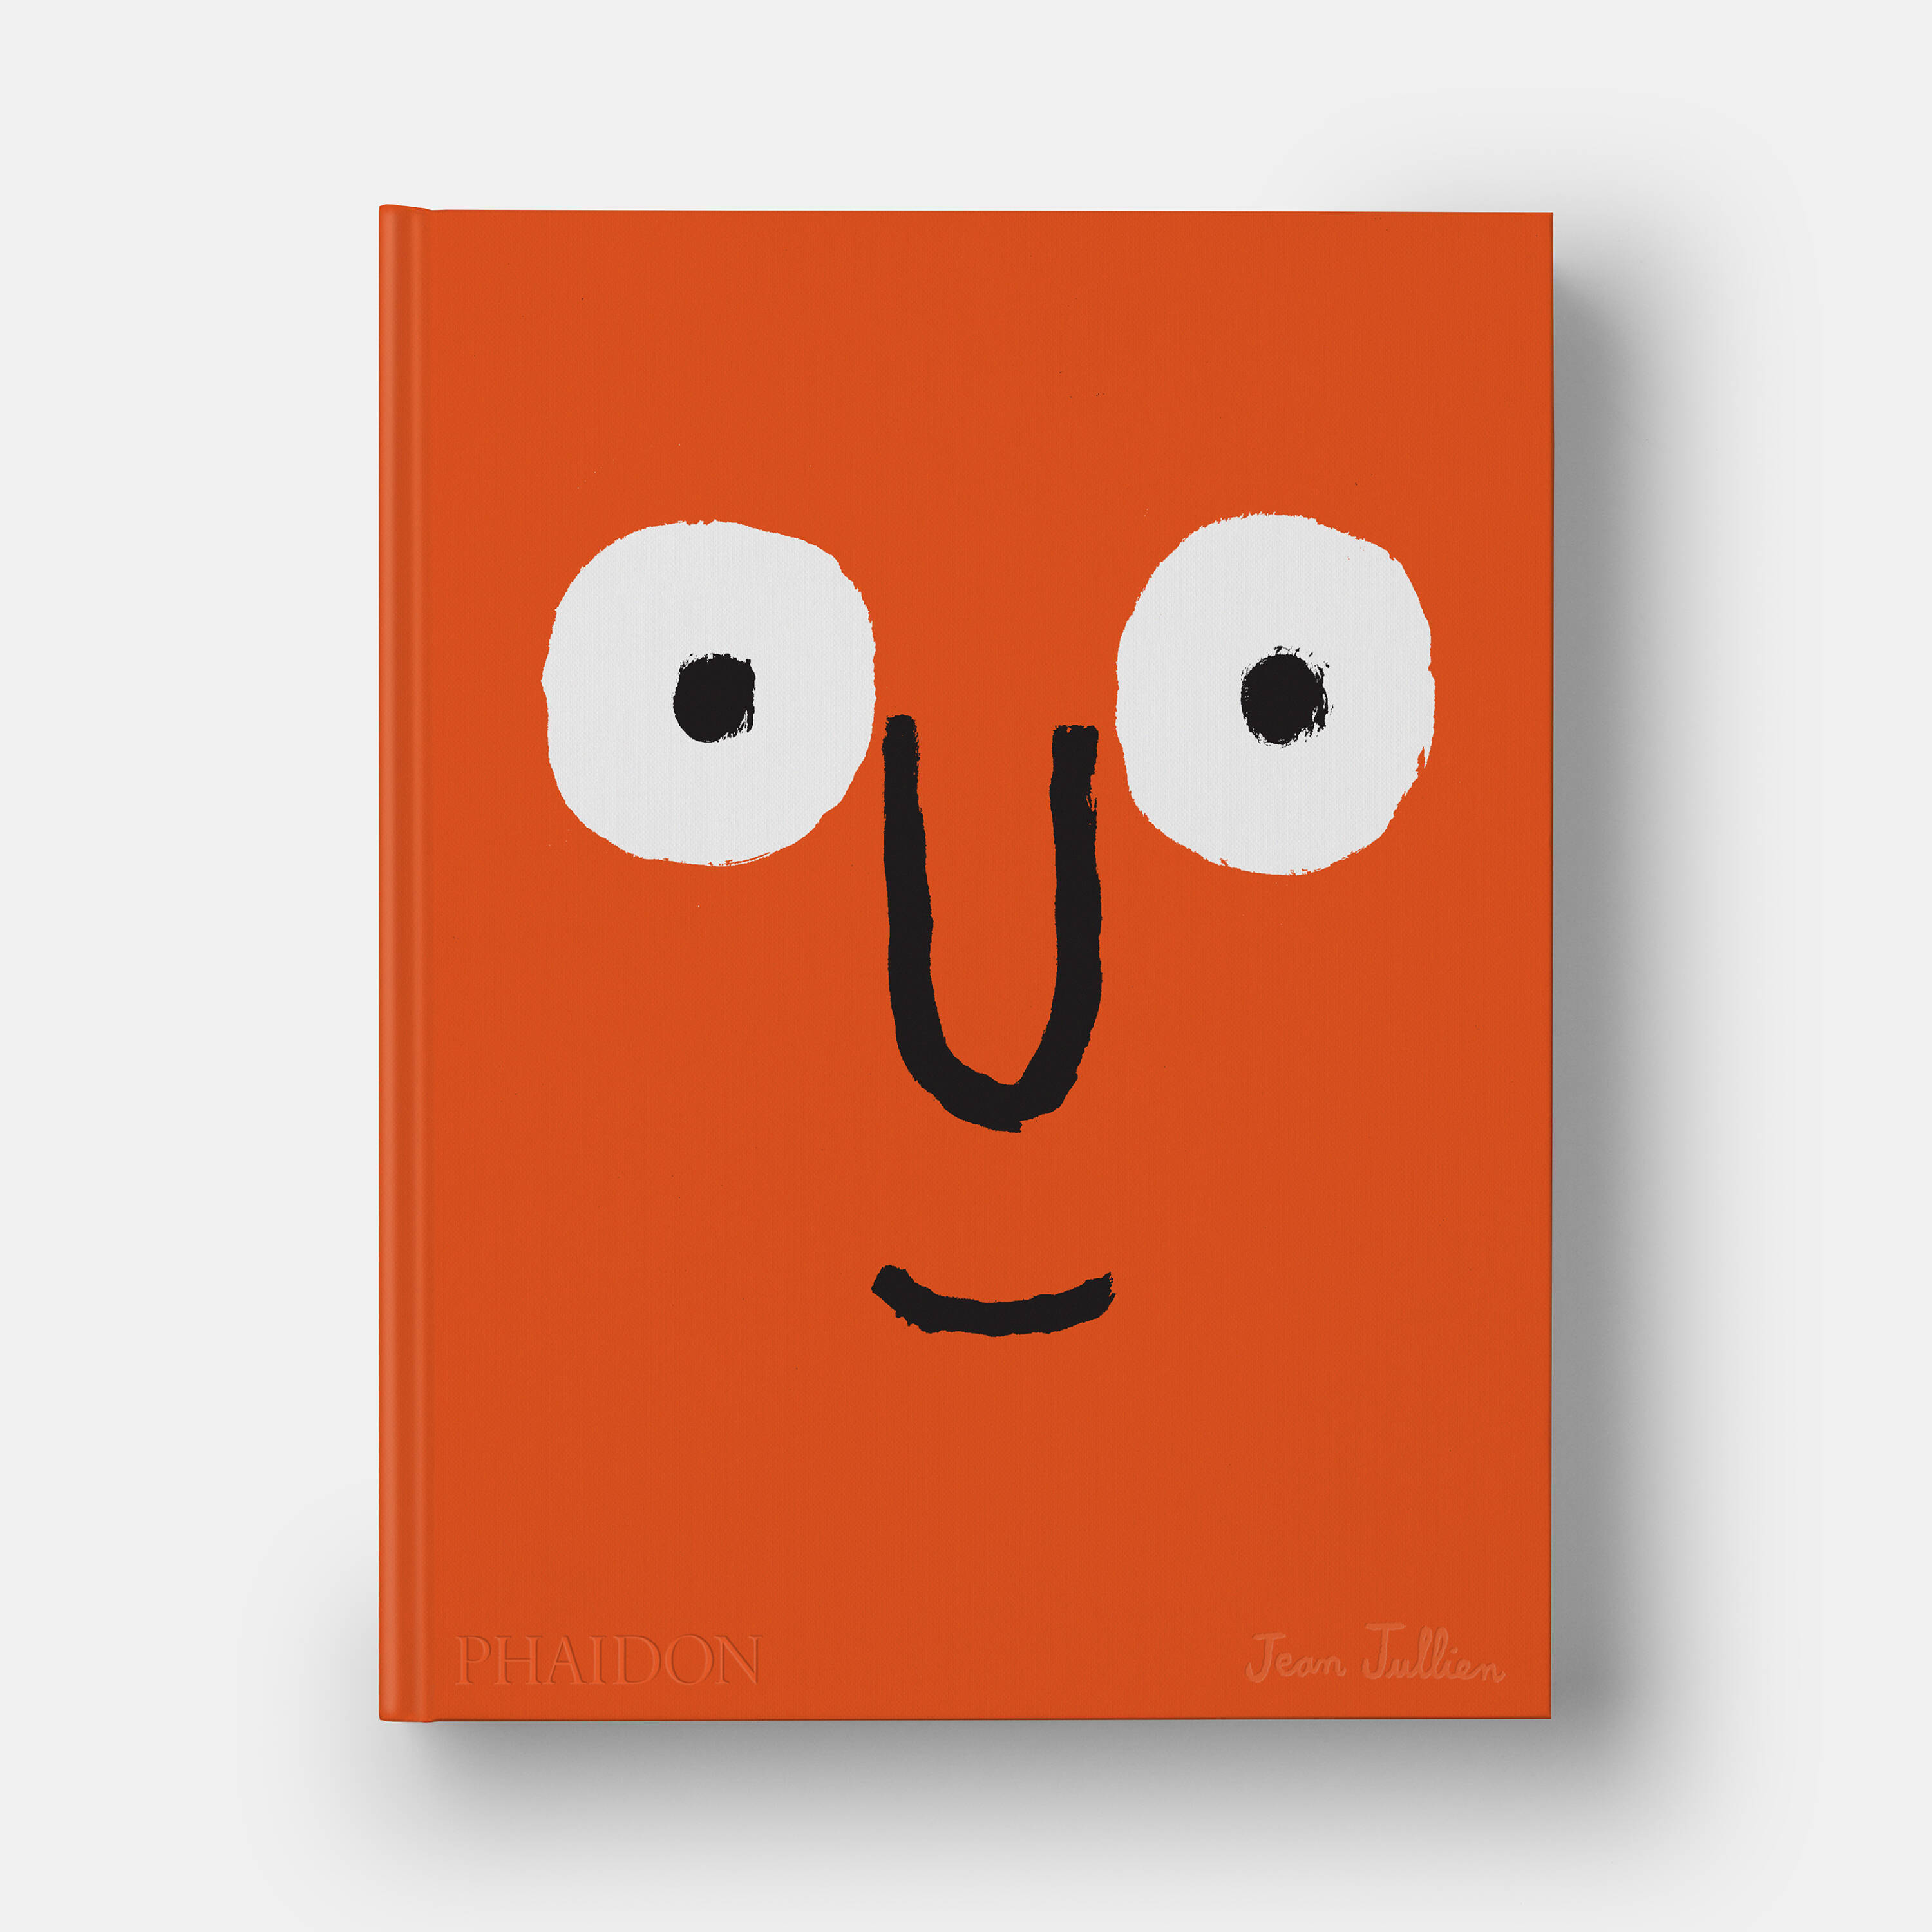 All you need to know about Jean Jullien